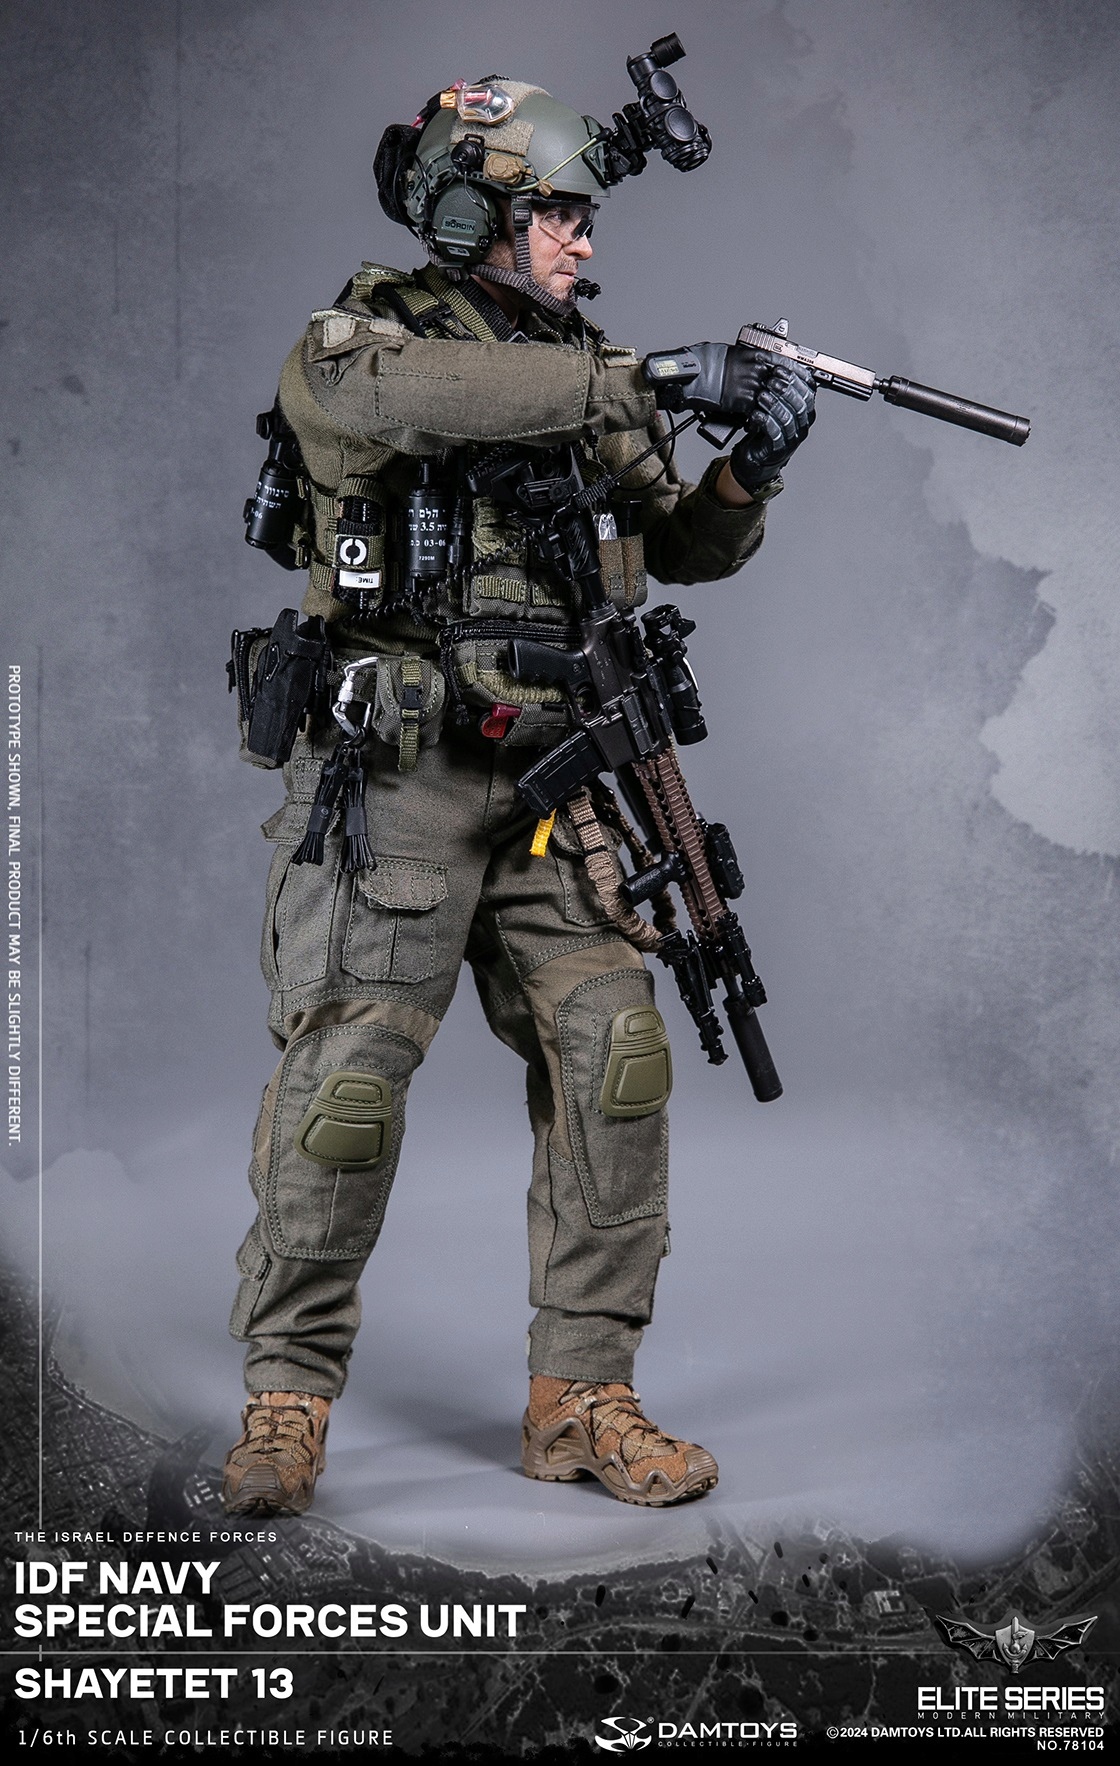 AnthonyStarr - NEW PRODUCT: DAMTOYS - Israeli IDF Naval Special Forces-13th Commando #78104 15200